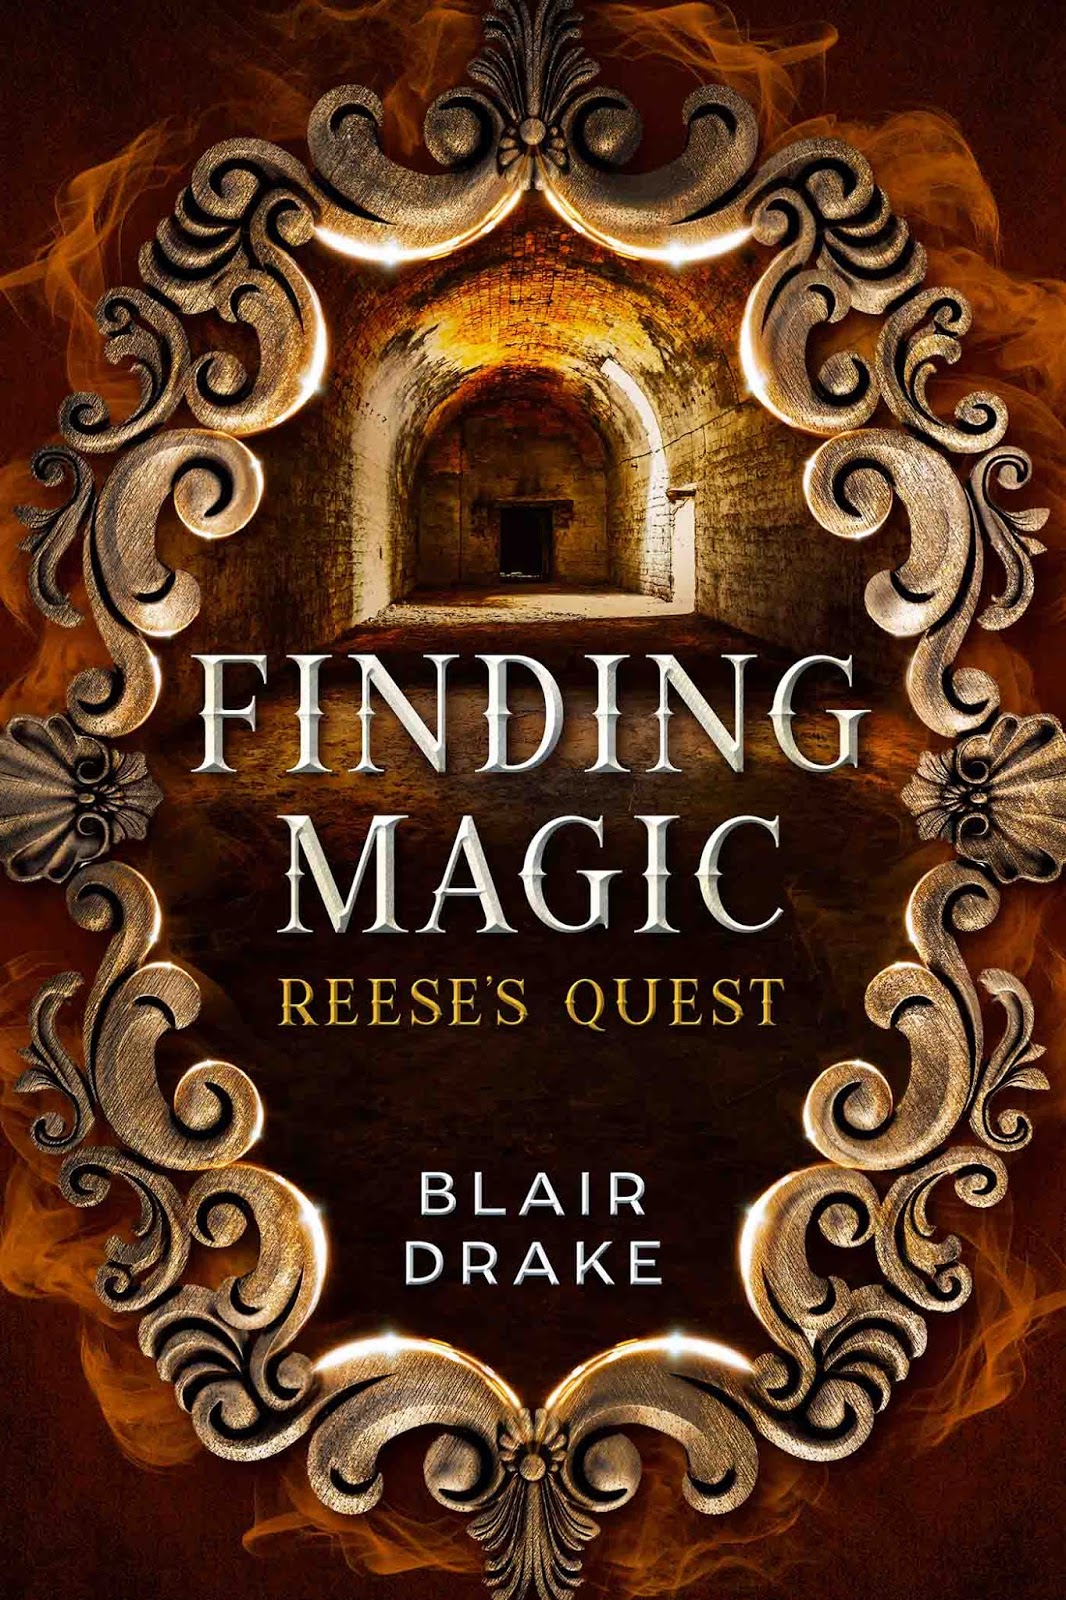 Paranormalists Reese S Quest By Blair Drake